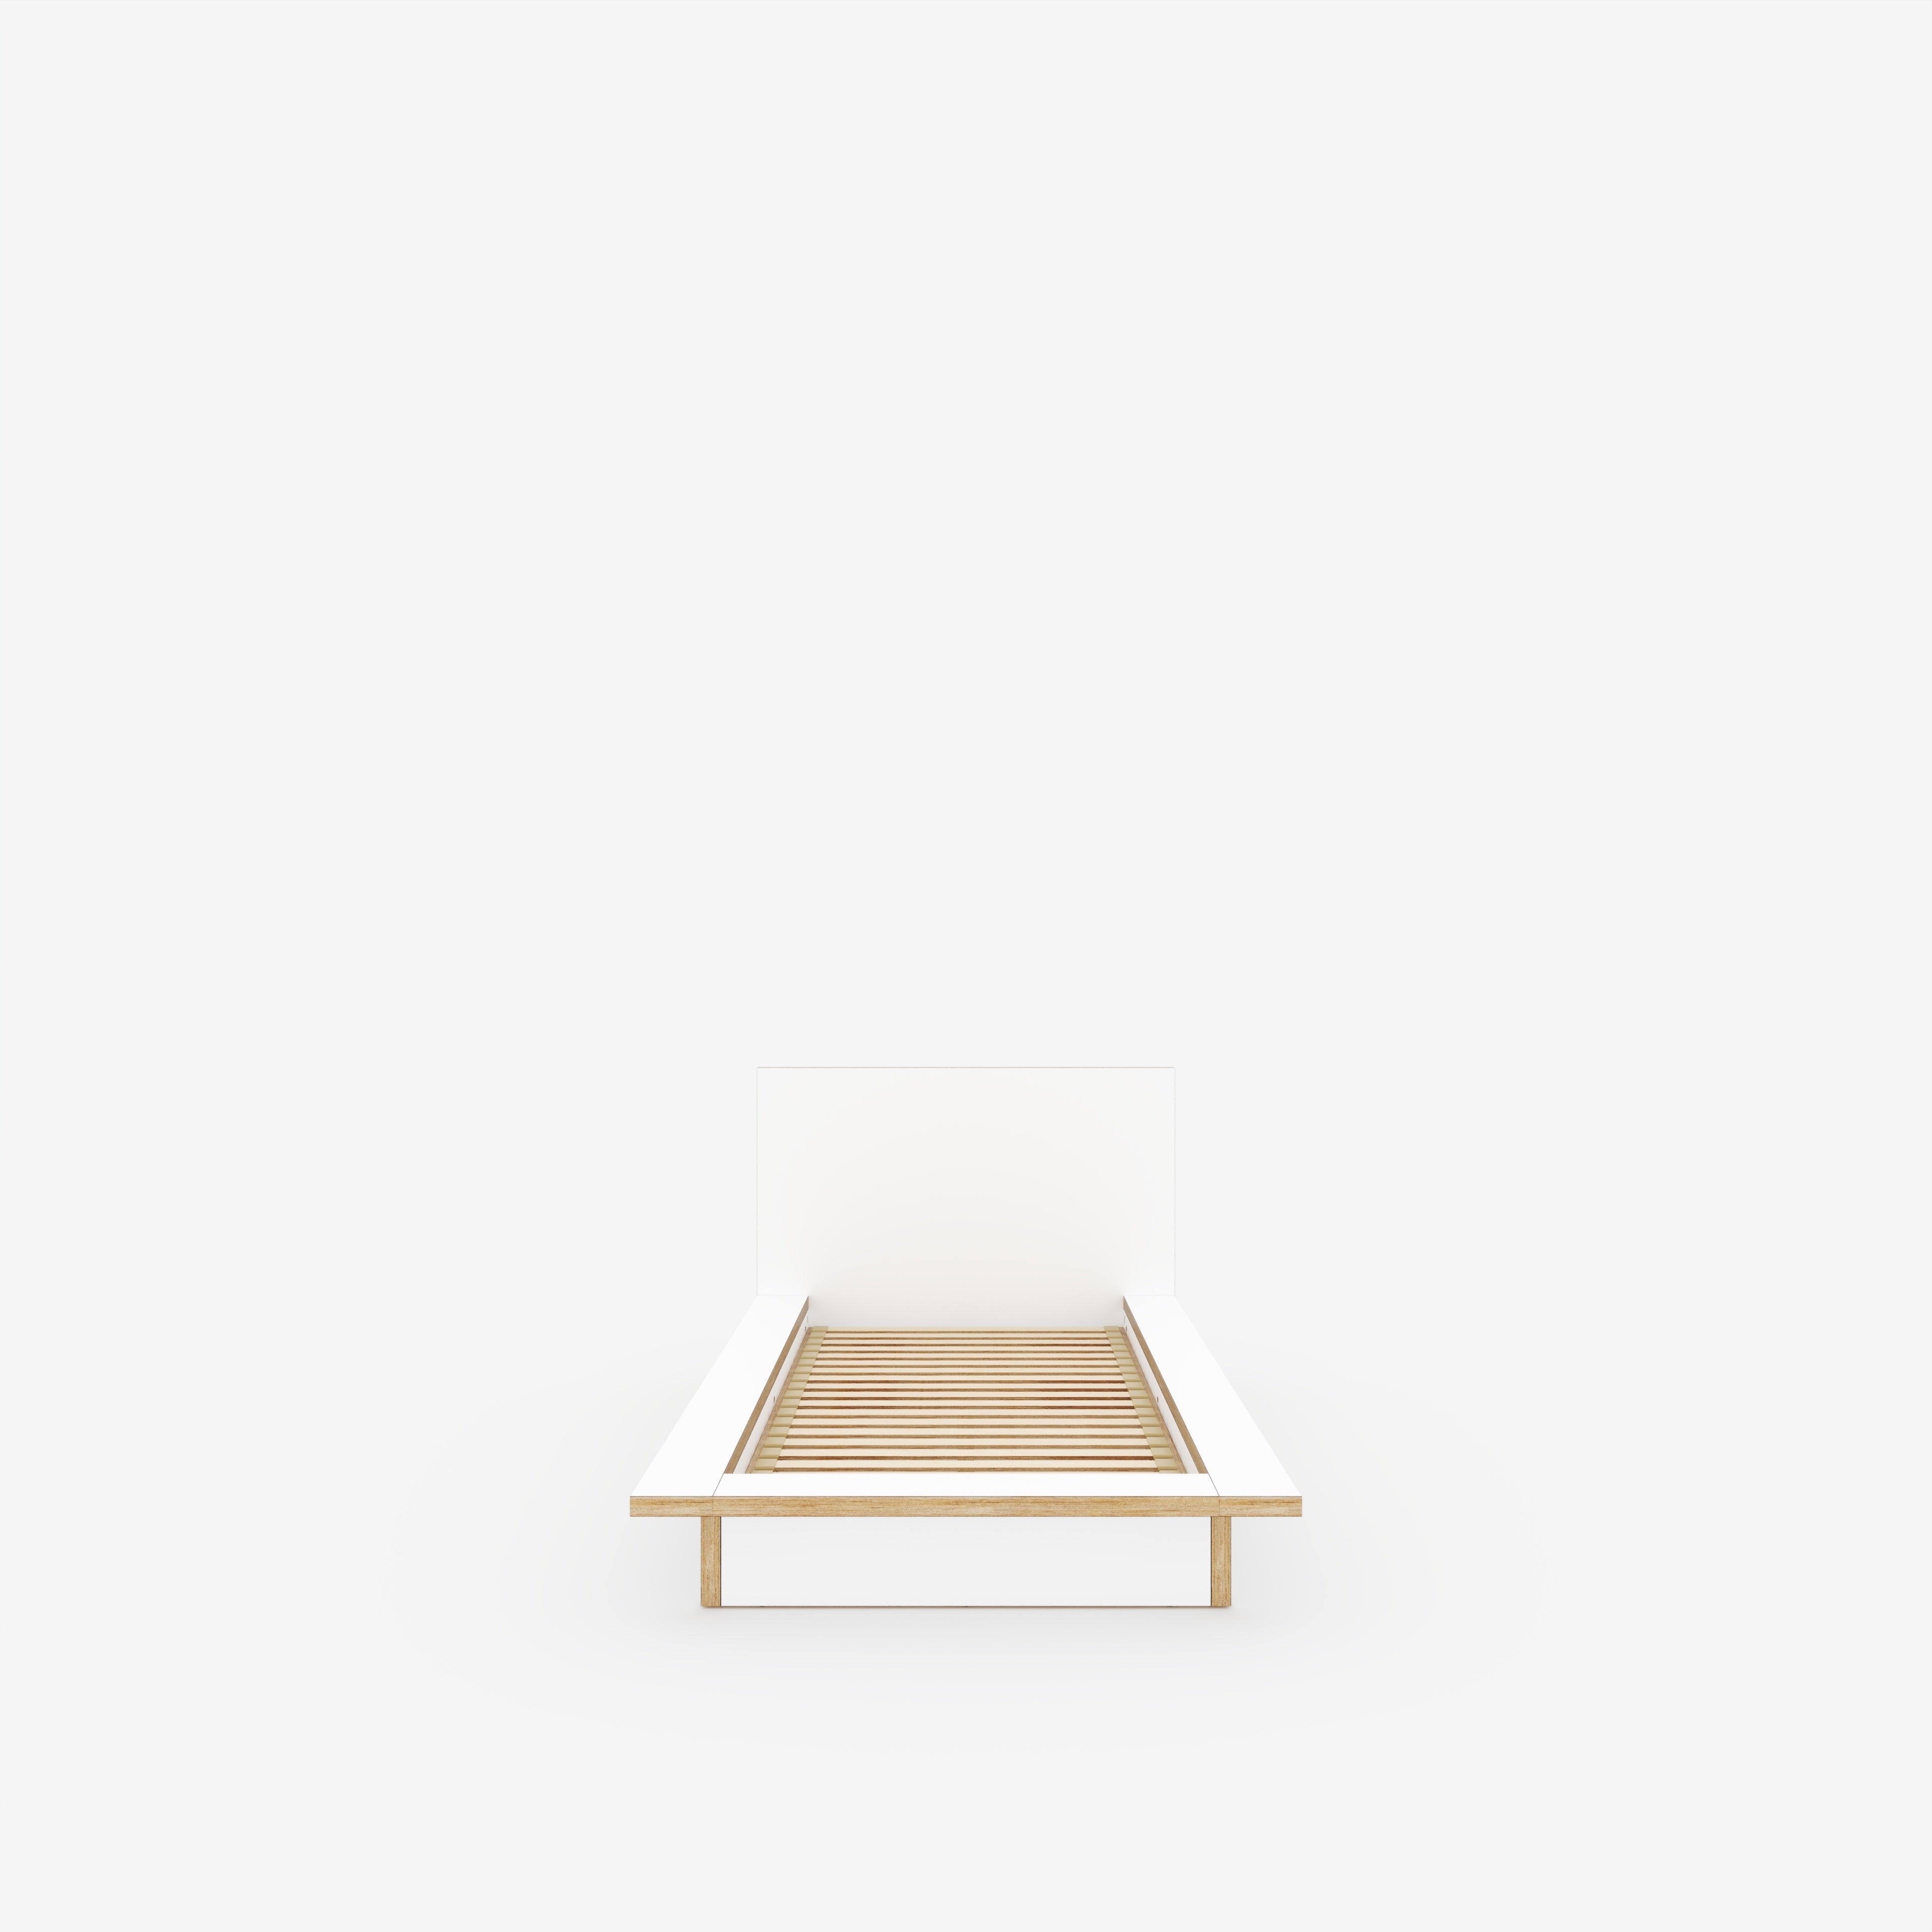 Plywood Platform Bed - Plywood Formica White - Standard Single 900(w) x 1900(d) - Low